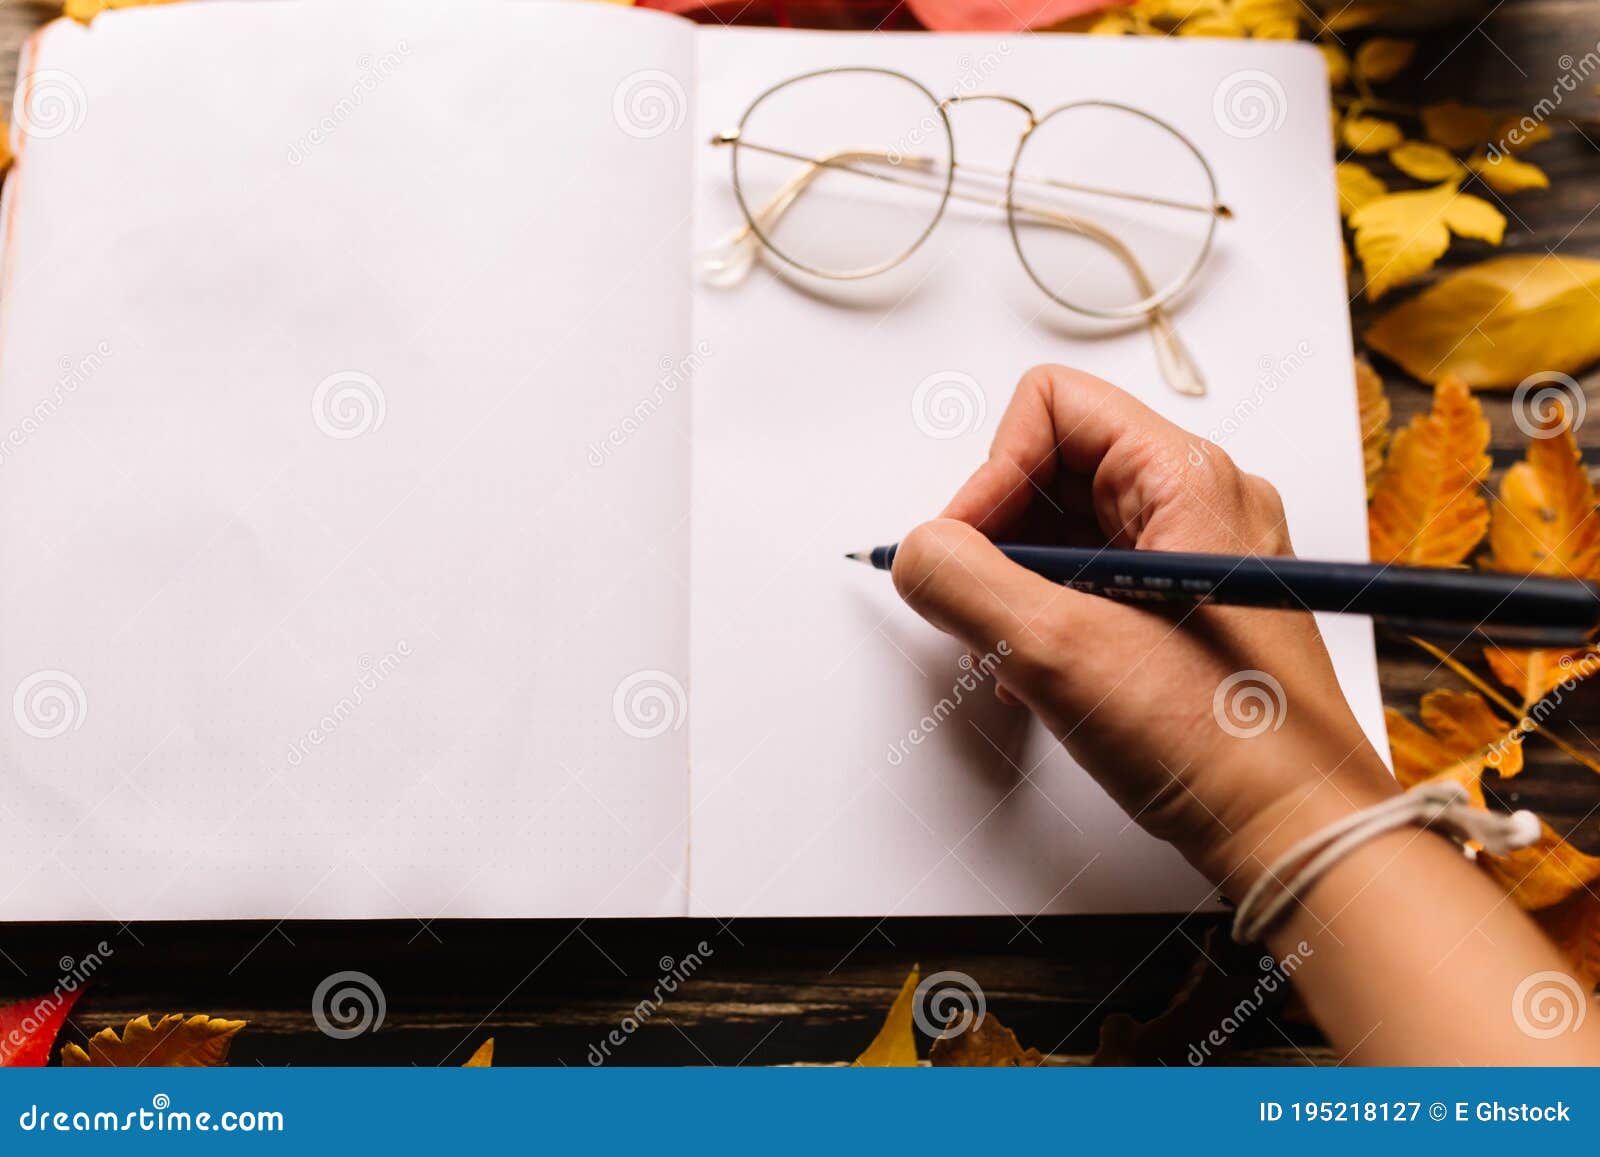 Female Hand Writing in a Bullet Journal. Blank Notepad Page with Women  Circle Glasses on Top in a Cozy Space with Autumn Orange, Stock Image -  Image of inspired, ideas: 195218127